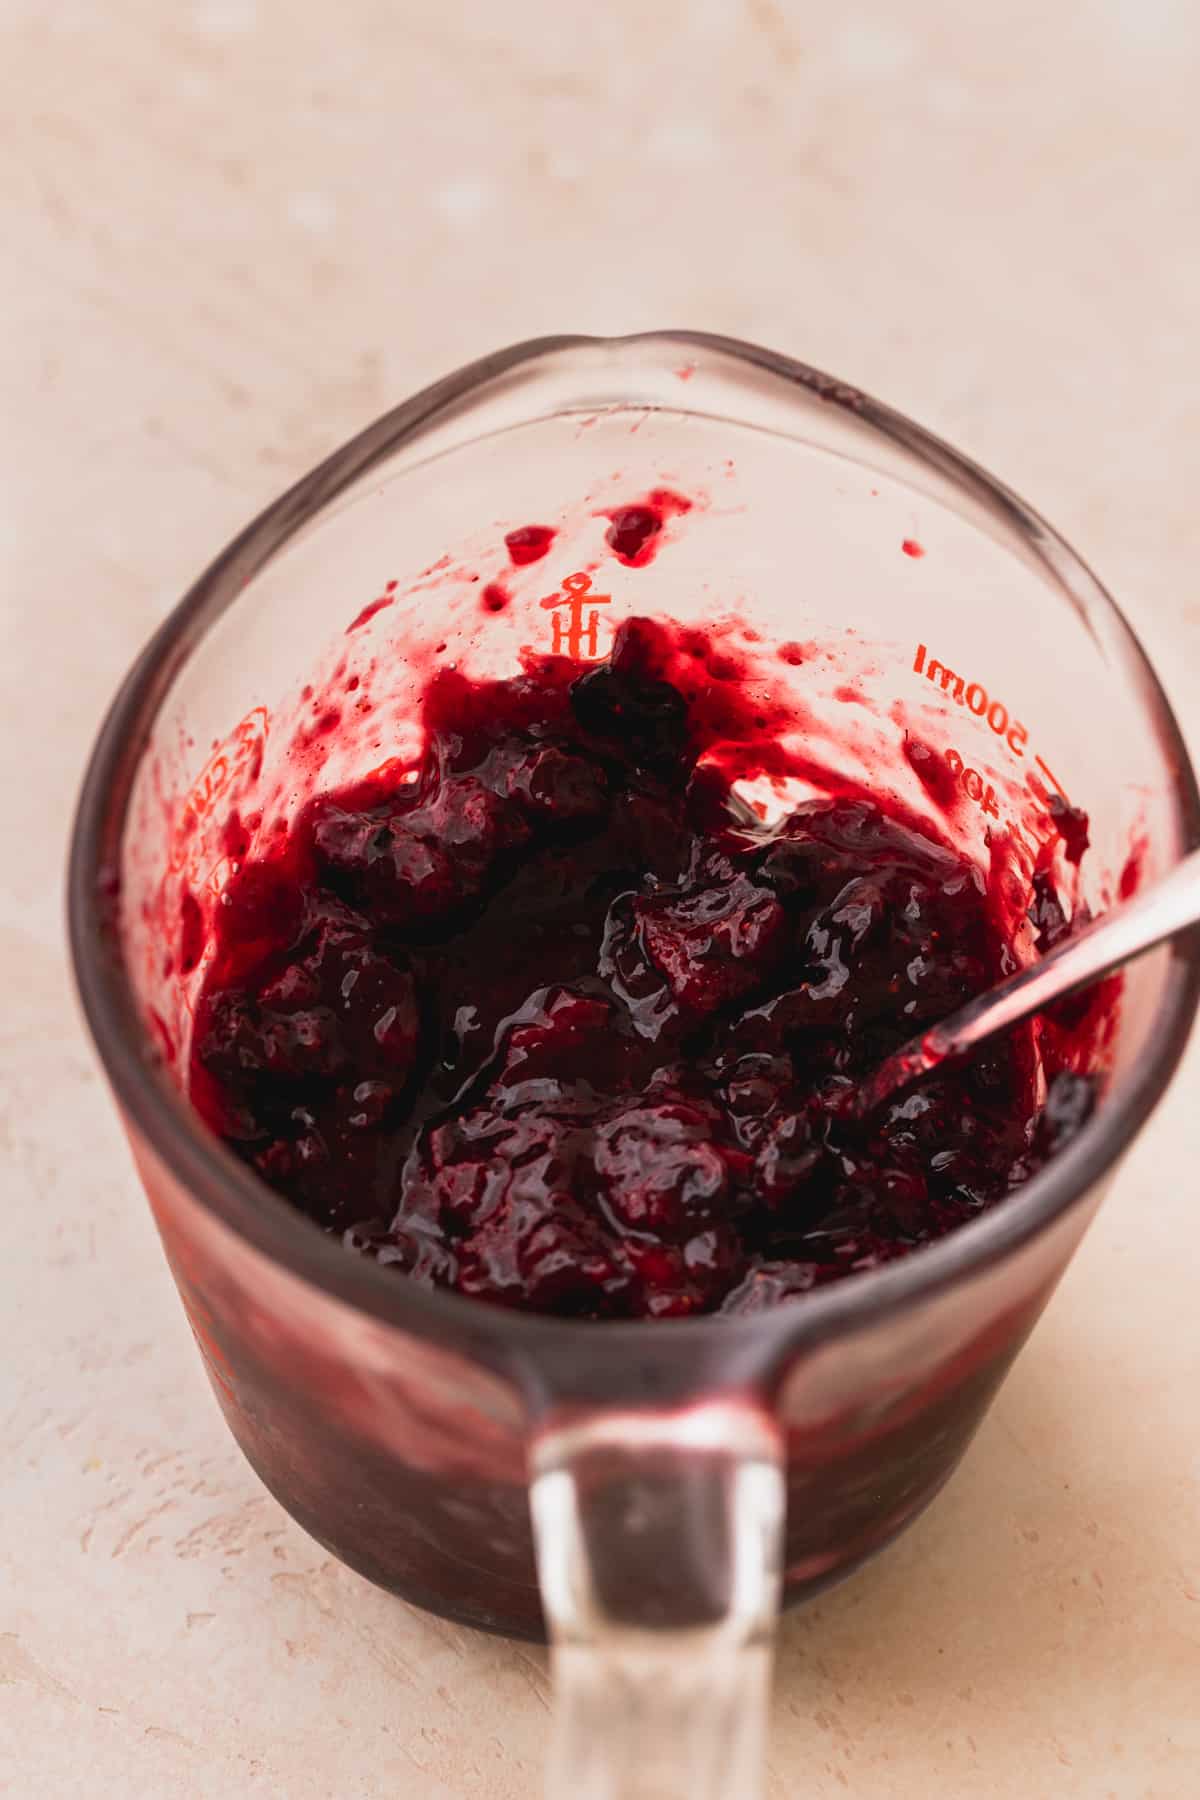 Strawberry blueberry jam in a glass measuring cup.